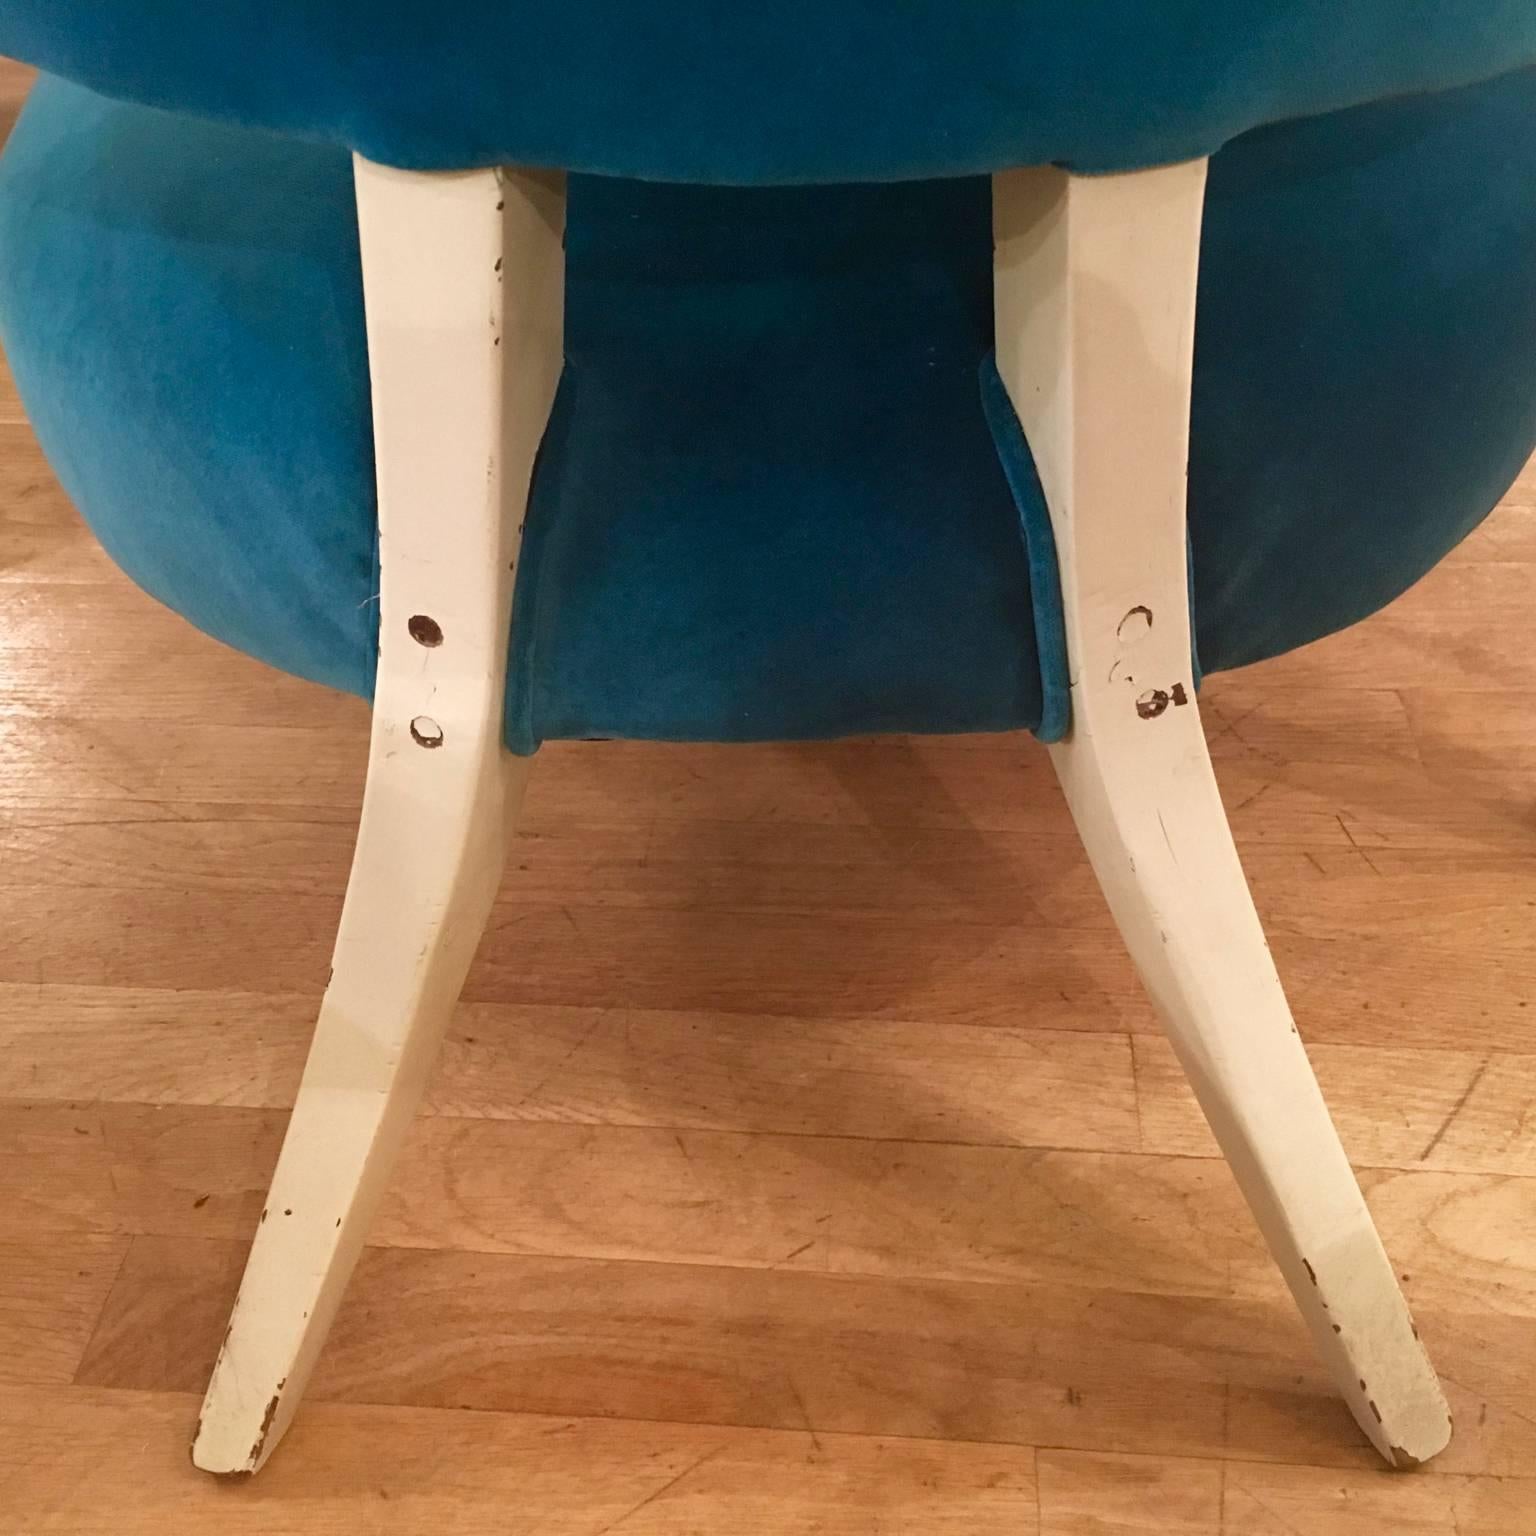 European Slipper Chairs Chauffeuses Overpainted White, Blue Velour Upholstery, 1950s Pair